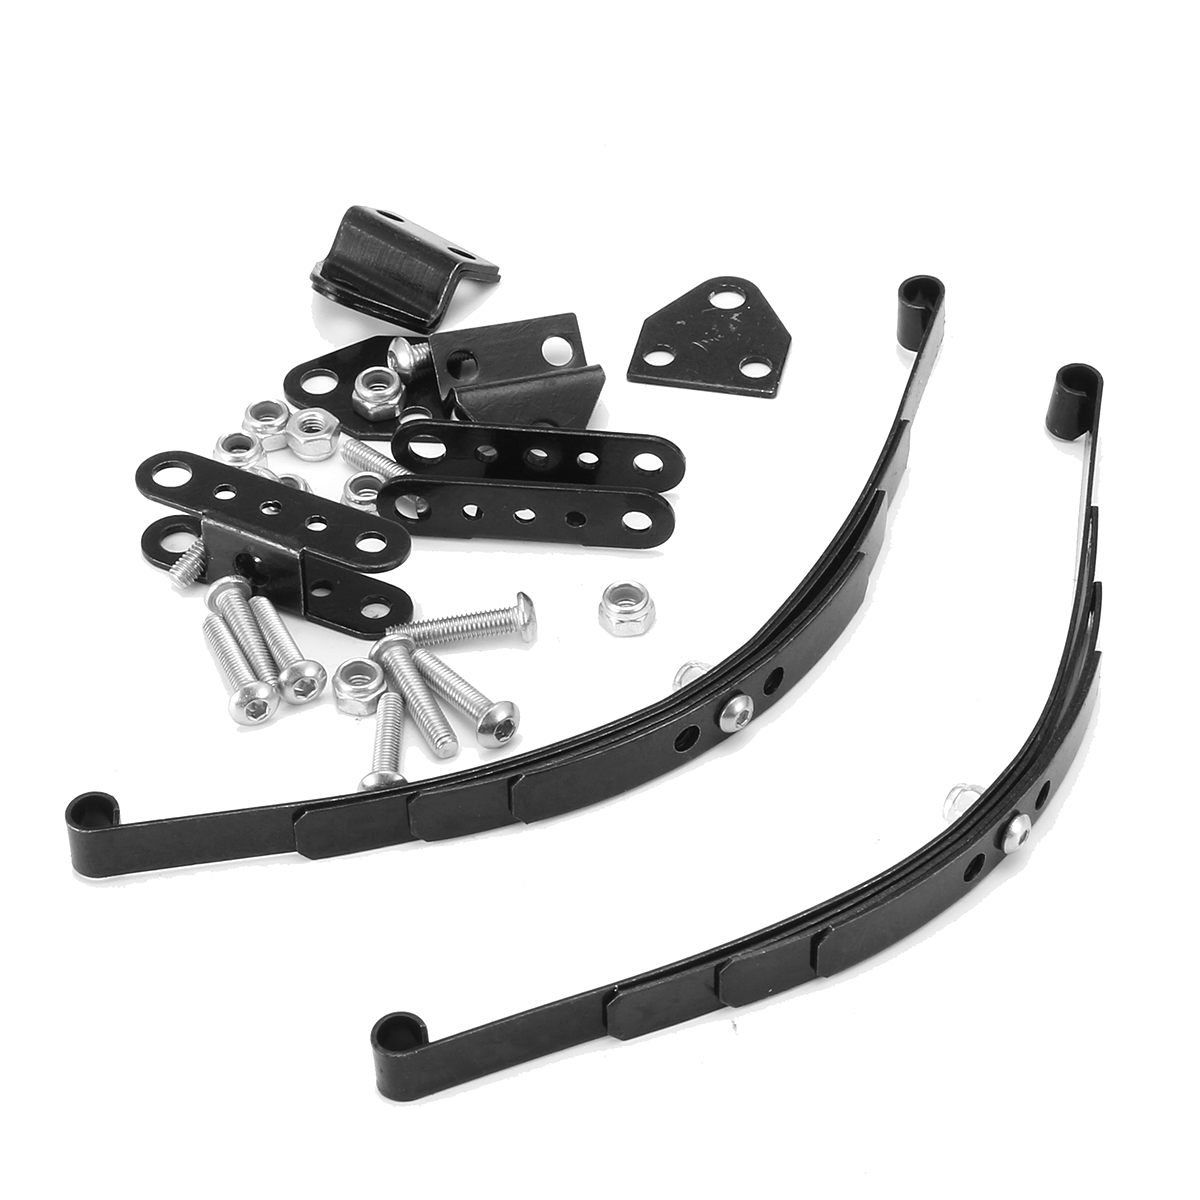 

1/2 Set Speed Steel Leaf Springs Type Suspension Car Crawler For RC 4WD TF2 D90 Car Parts